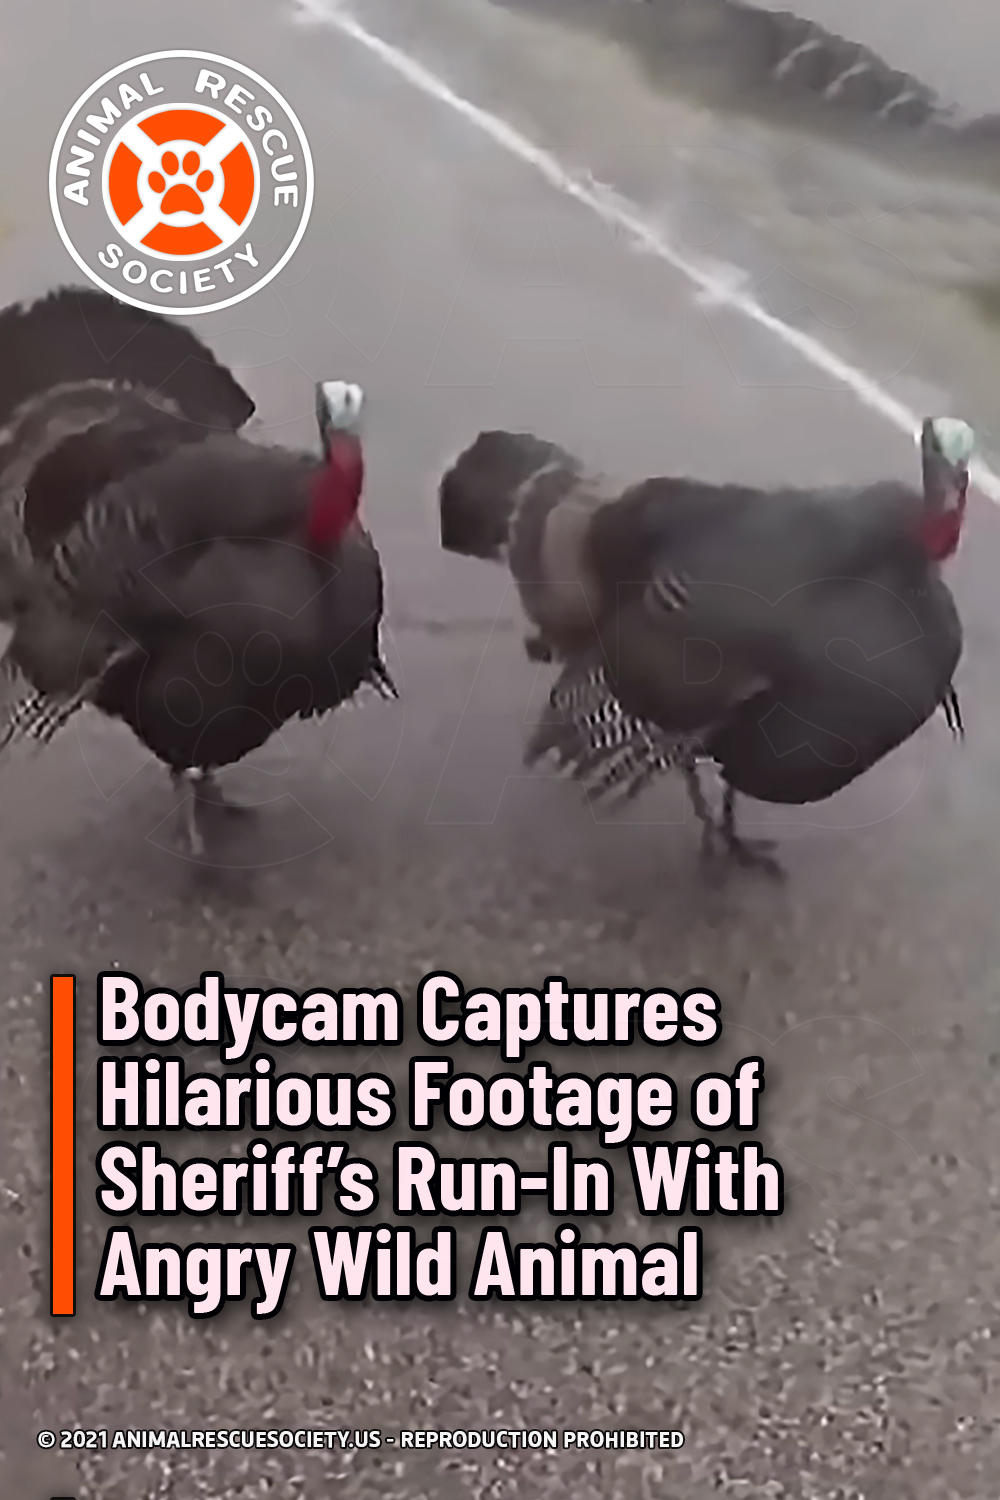 Bodycam Captures Hilarious Footage of Sheriff’s Run-In With Angry Wild Animal